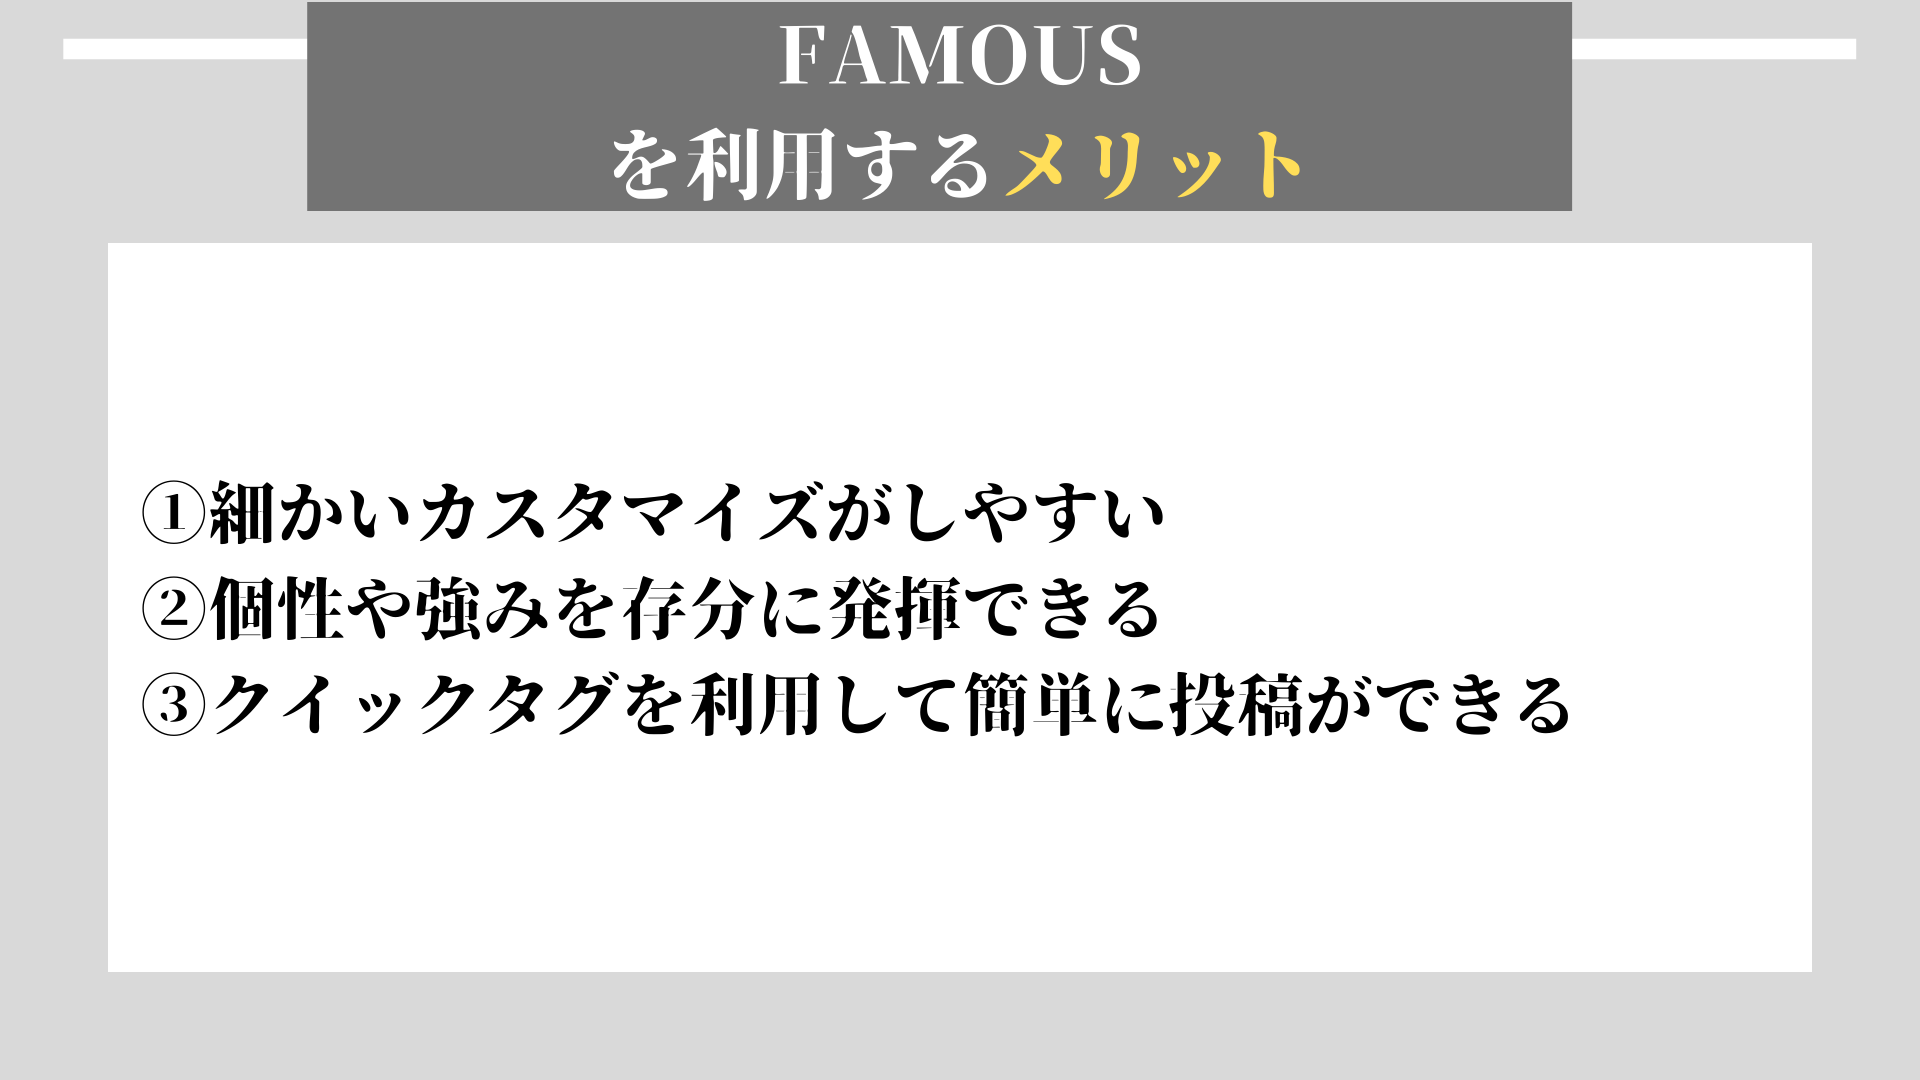 FAMOUS メリット